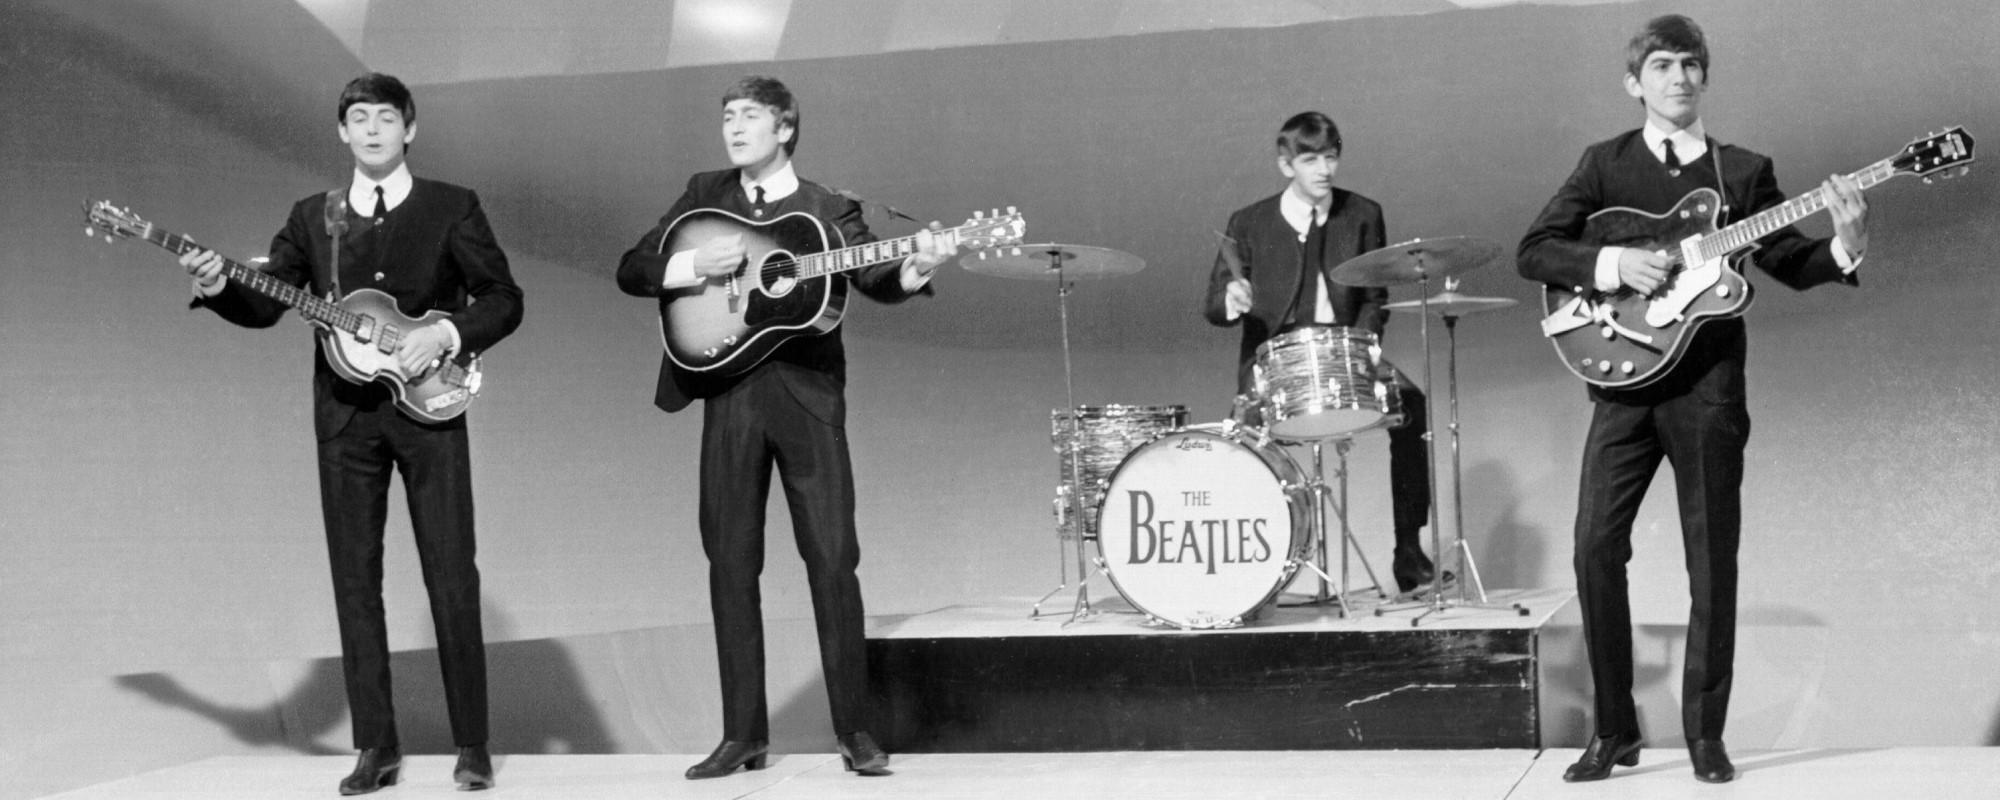 60 Years Ago The Beatles Made History by Holding Every Top 5 Single on the ‘Billboard’ Hot 100